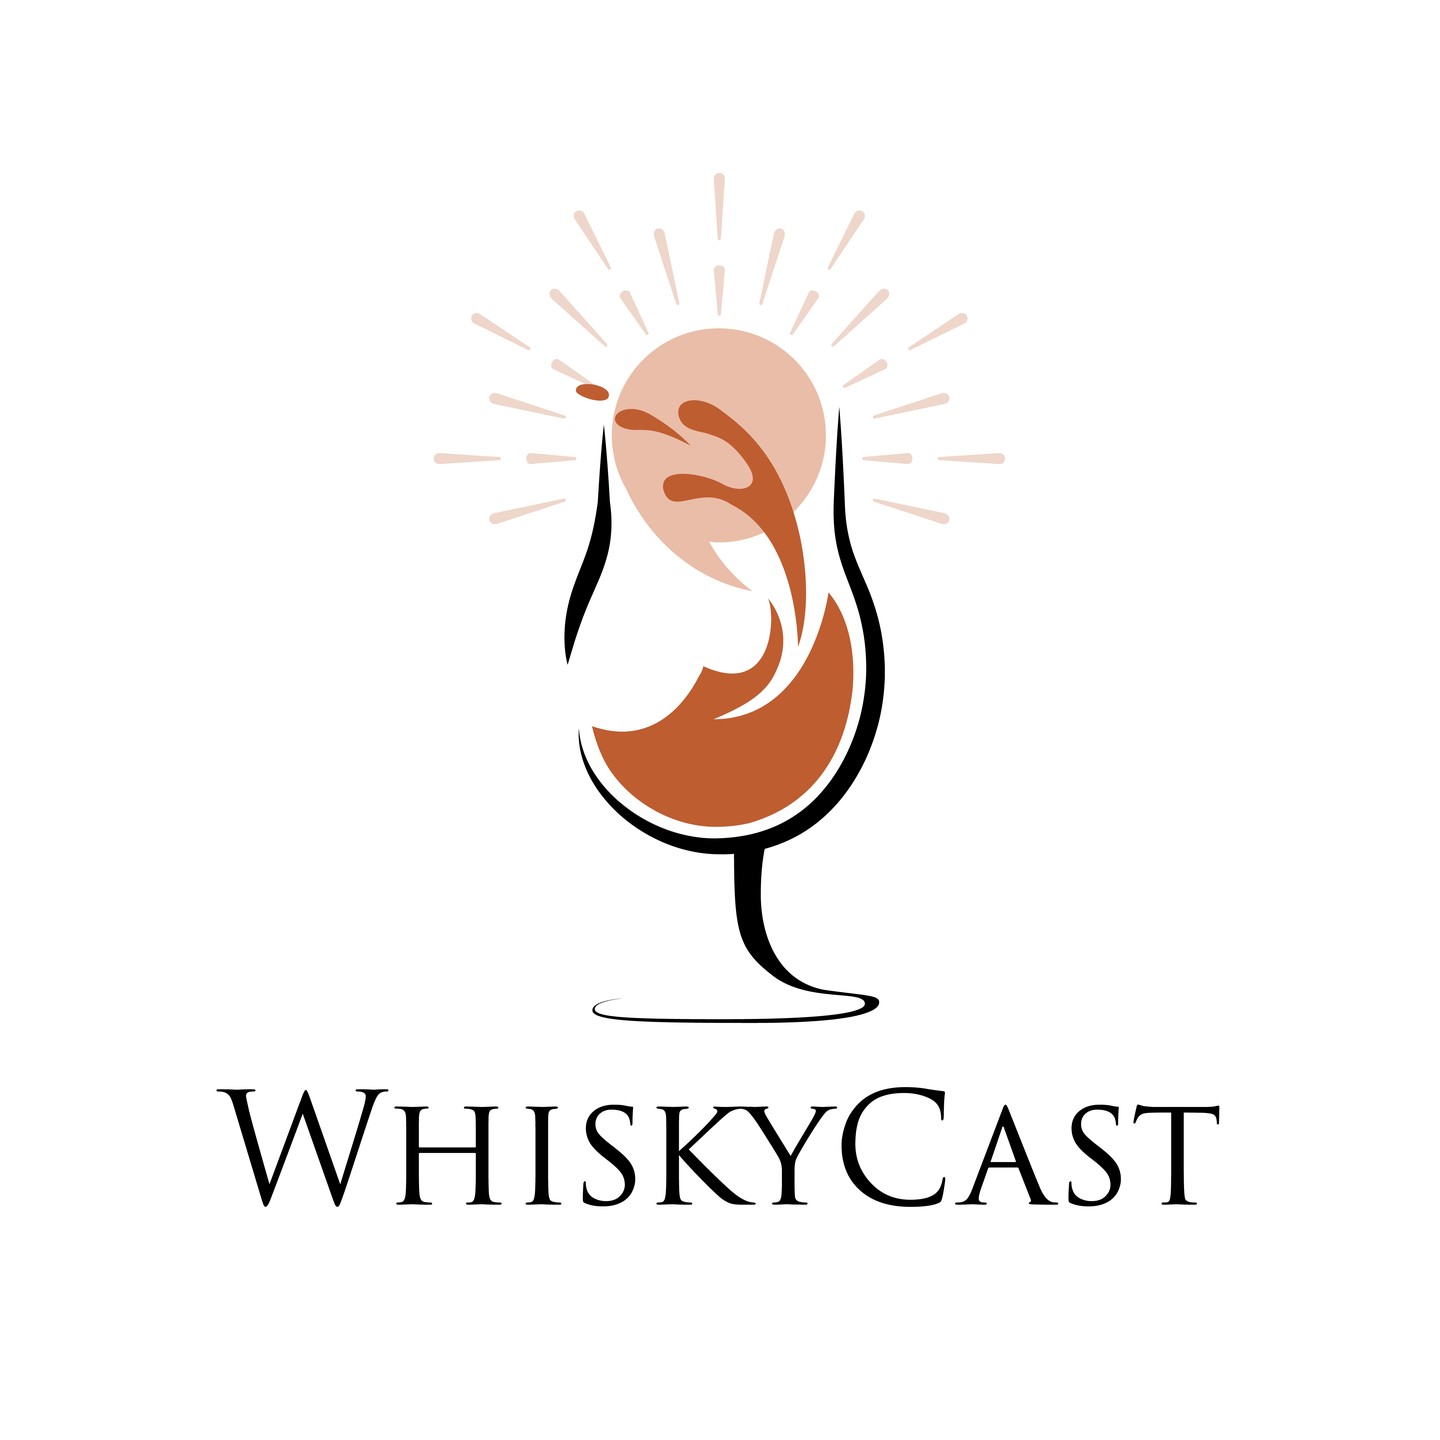 17 years ago today, the very first episode of WhiskyCast hit the internet. We're celebrating with an updated version of the logo we've been using for years! Thanks to all of you for listening and our sponsors...without your support, WhiskyCast wouldn't be the world's longest-running whisky podcast series.